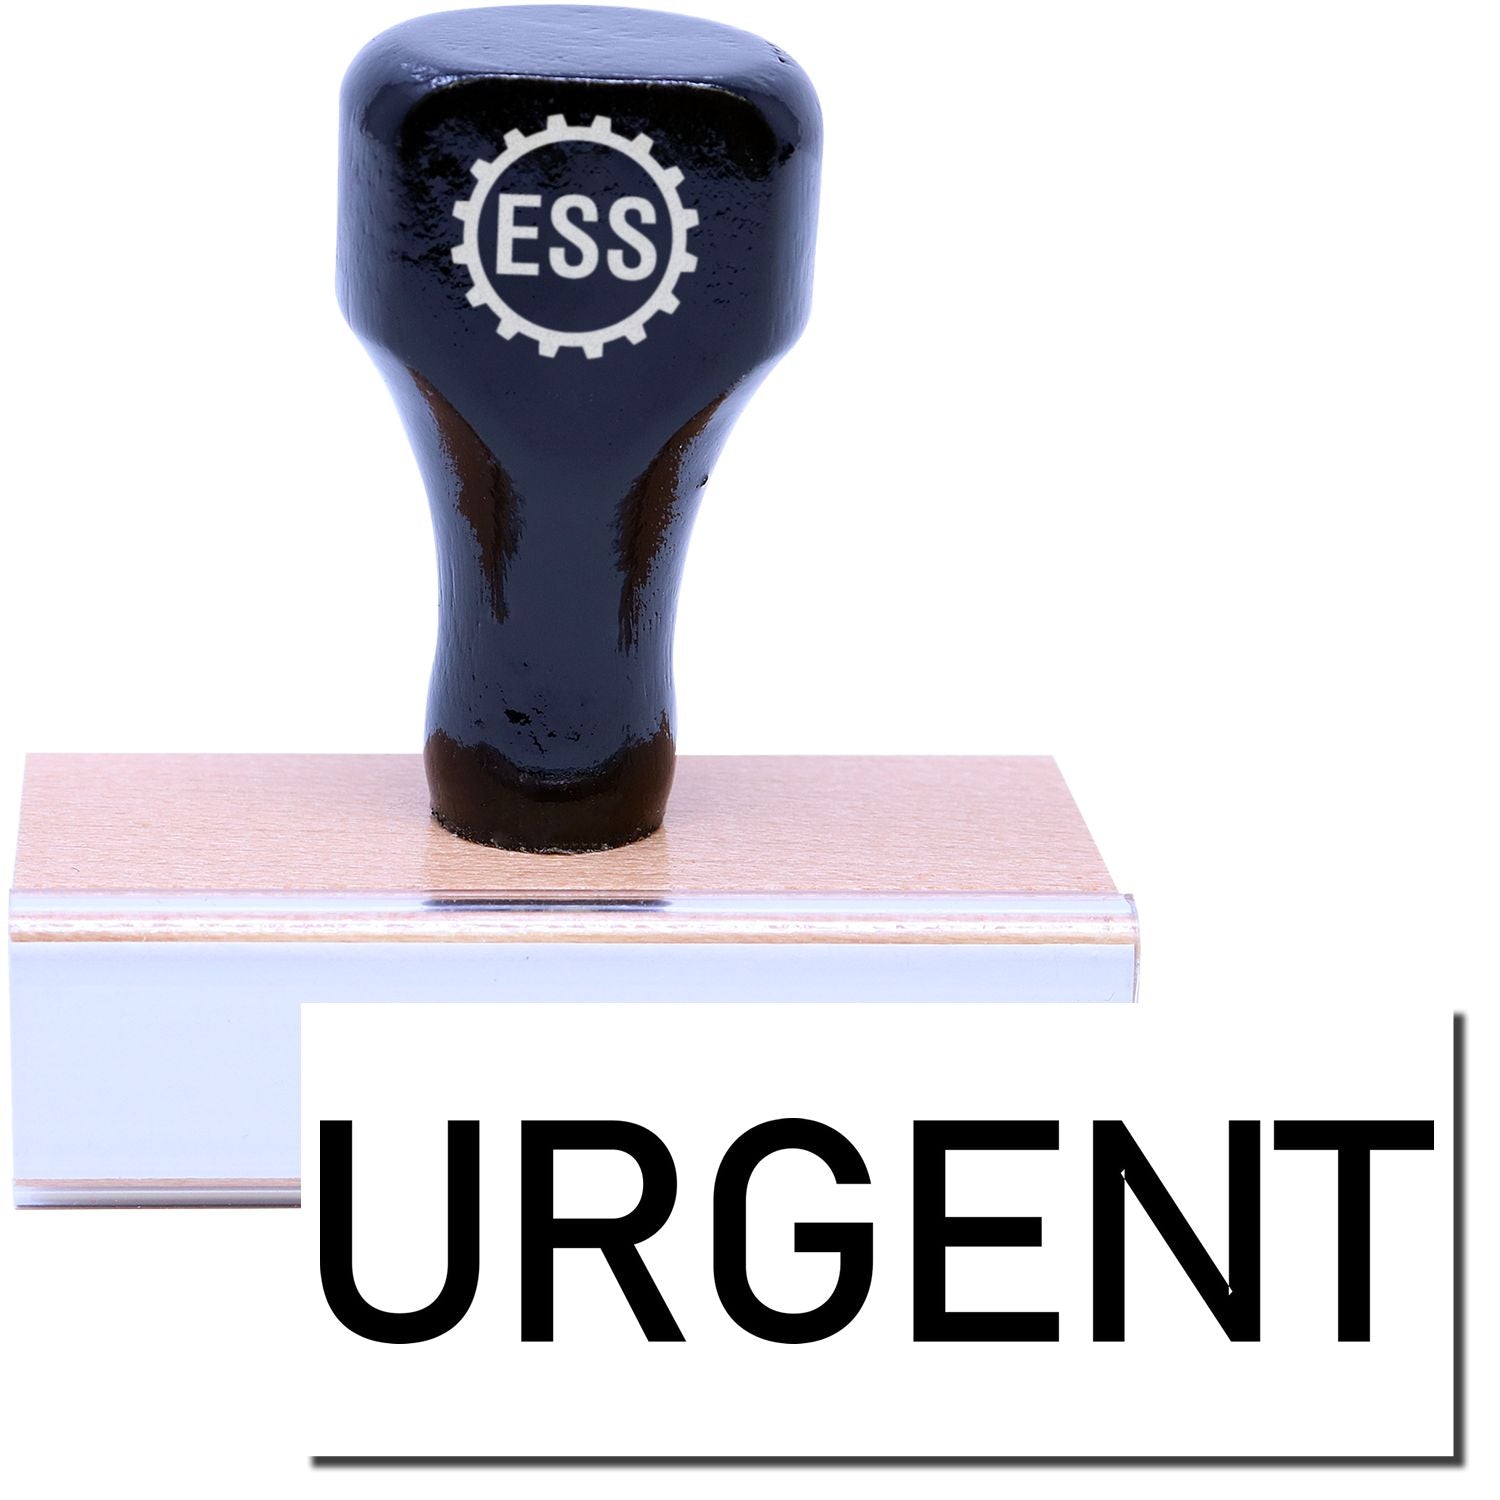 A stock office rubber stamp with a stamped image showing how the text "URGENT" in a large narrow font is displayed after stamping.